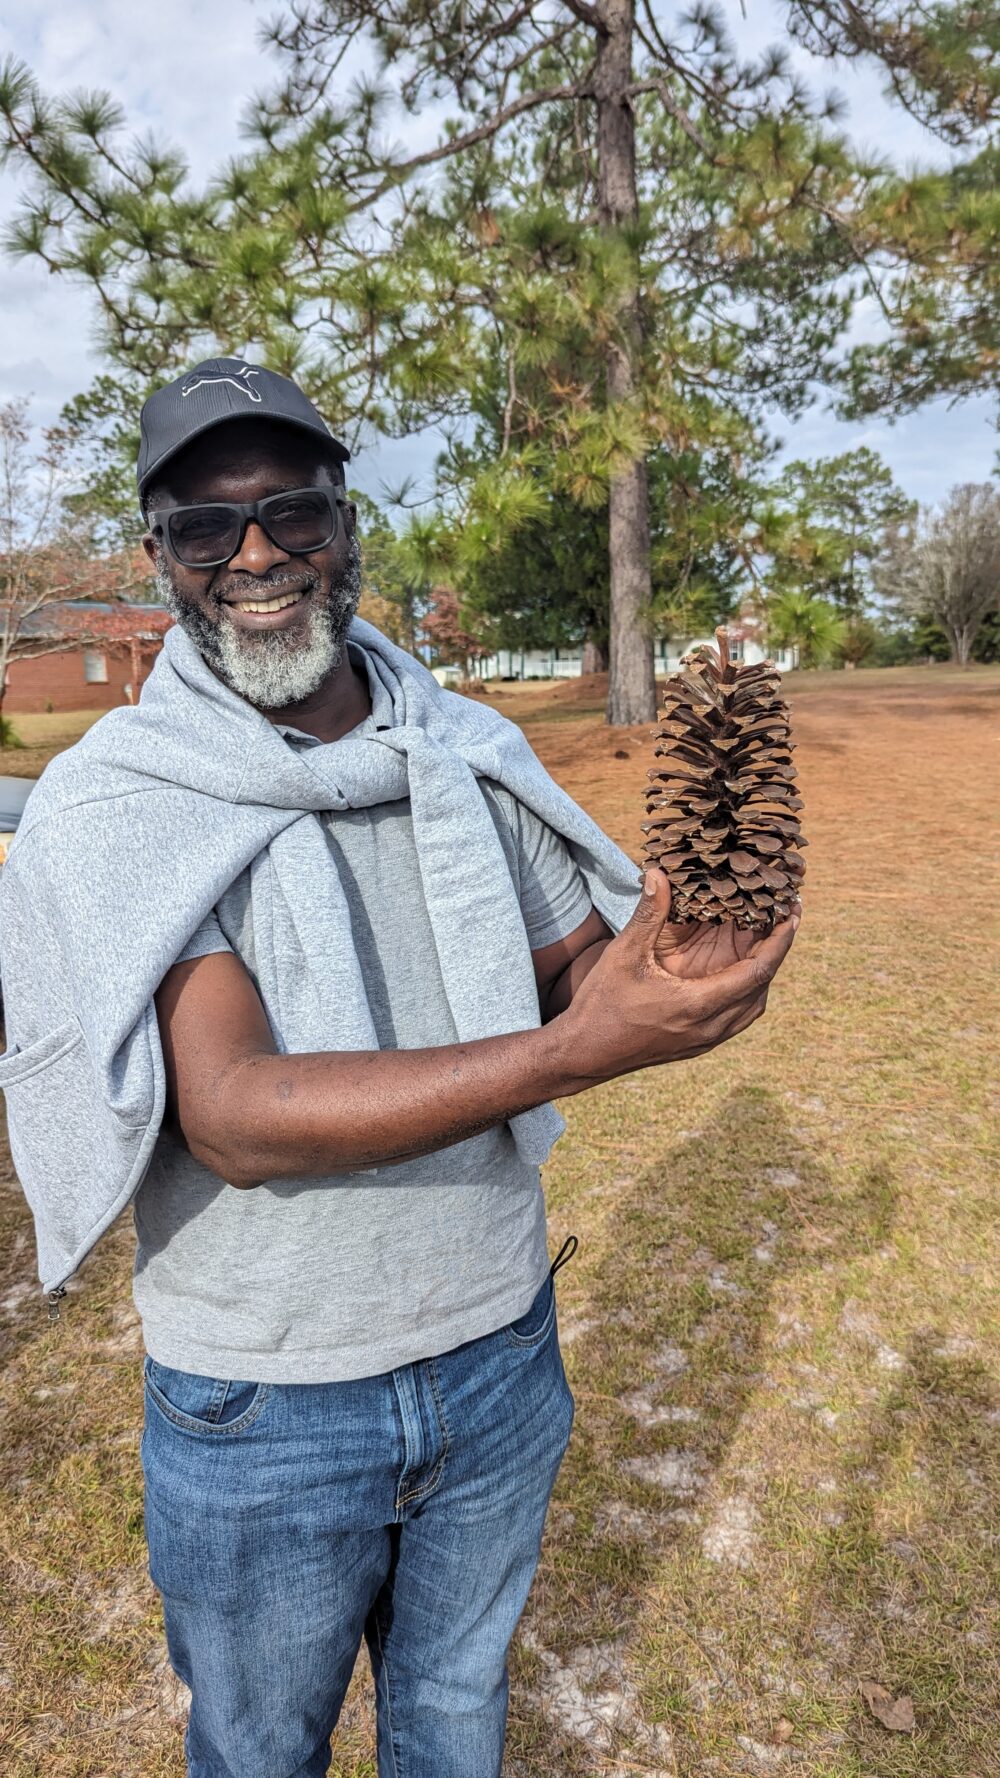 A person holds a large pine cone in their hands.